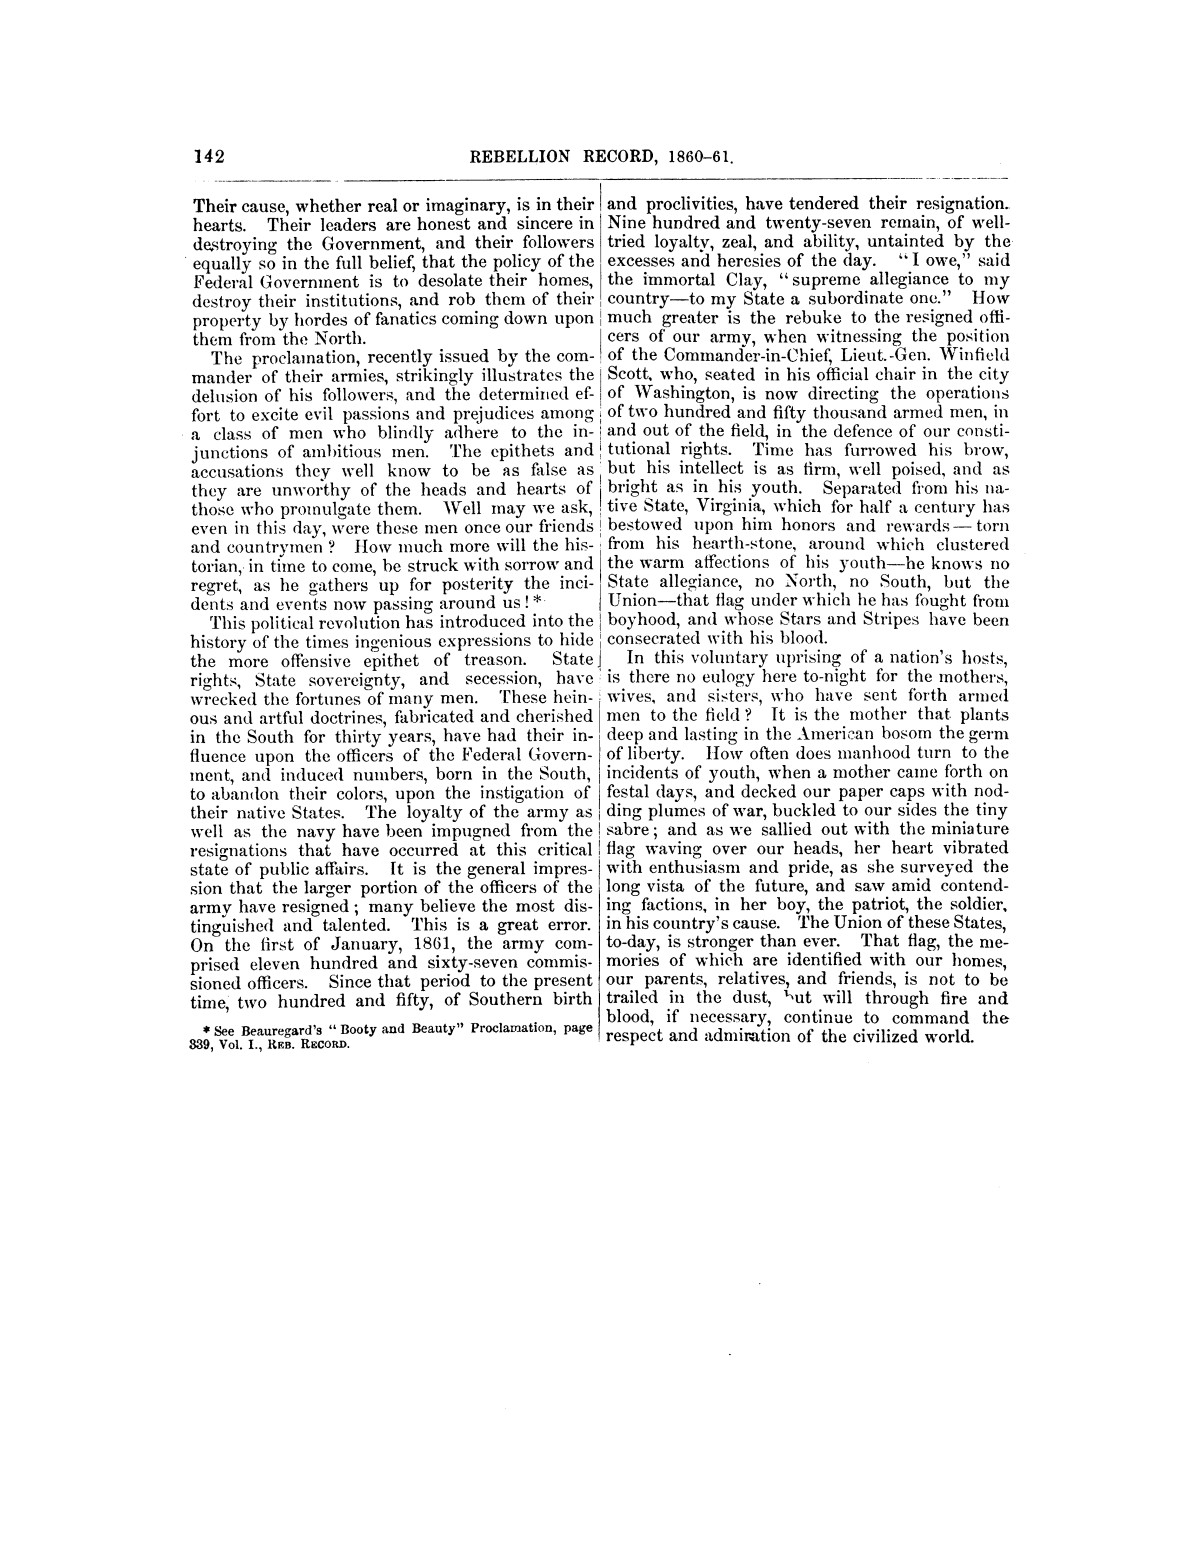 The treachery in Texas, the secession of Texas, and the arrest of the United States officers and soldiers serving in Texas. Read before the New-York Historical Society, June 25, 1861. By Major J. T. Sprague, U. S. A.
                                                
                                                    [Sequence #]: 36 of 36
                                                